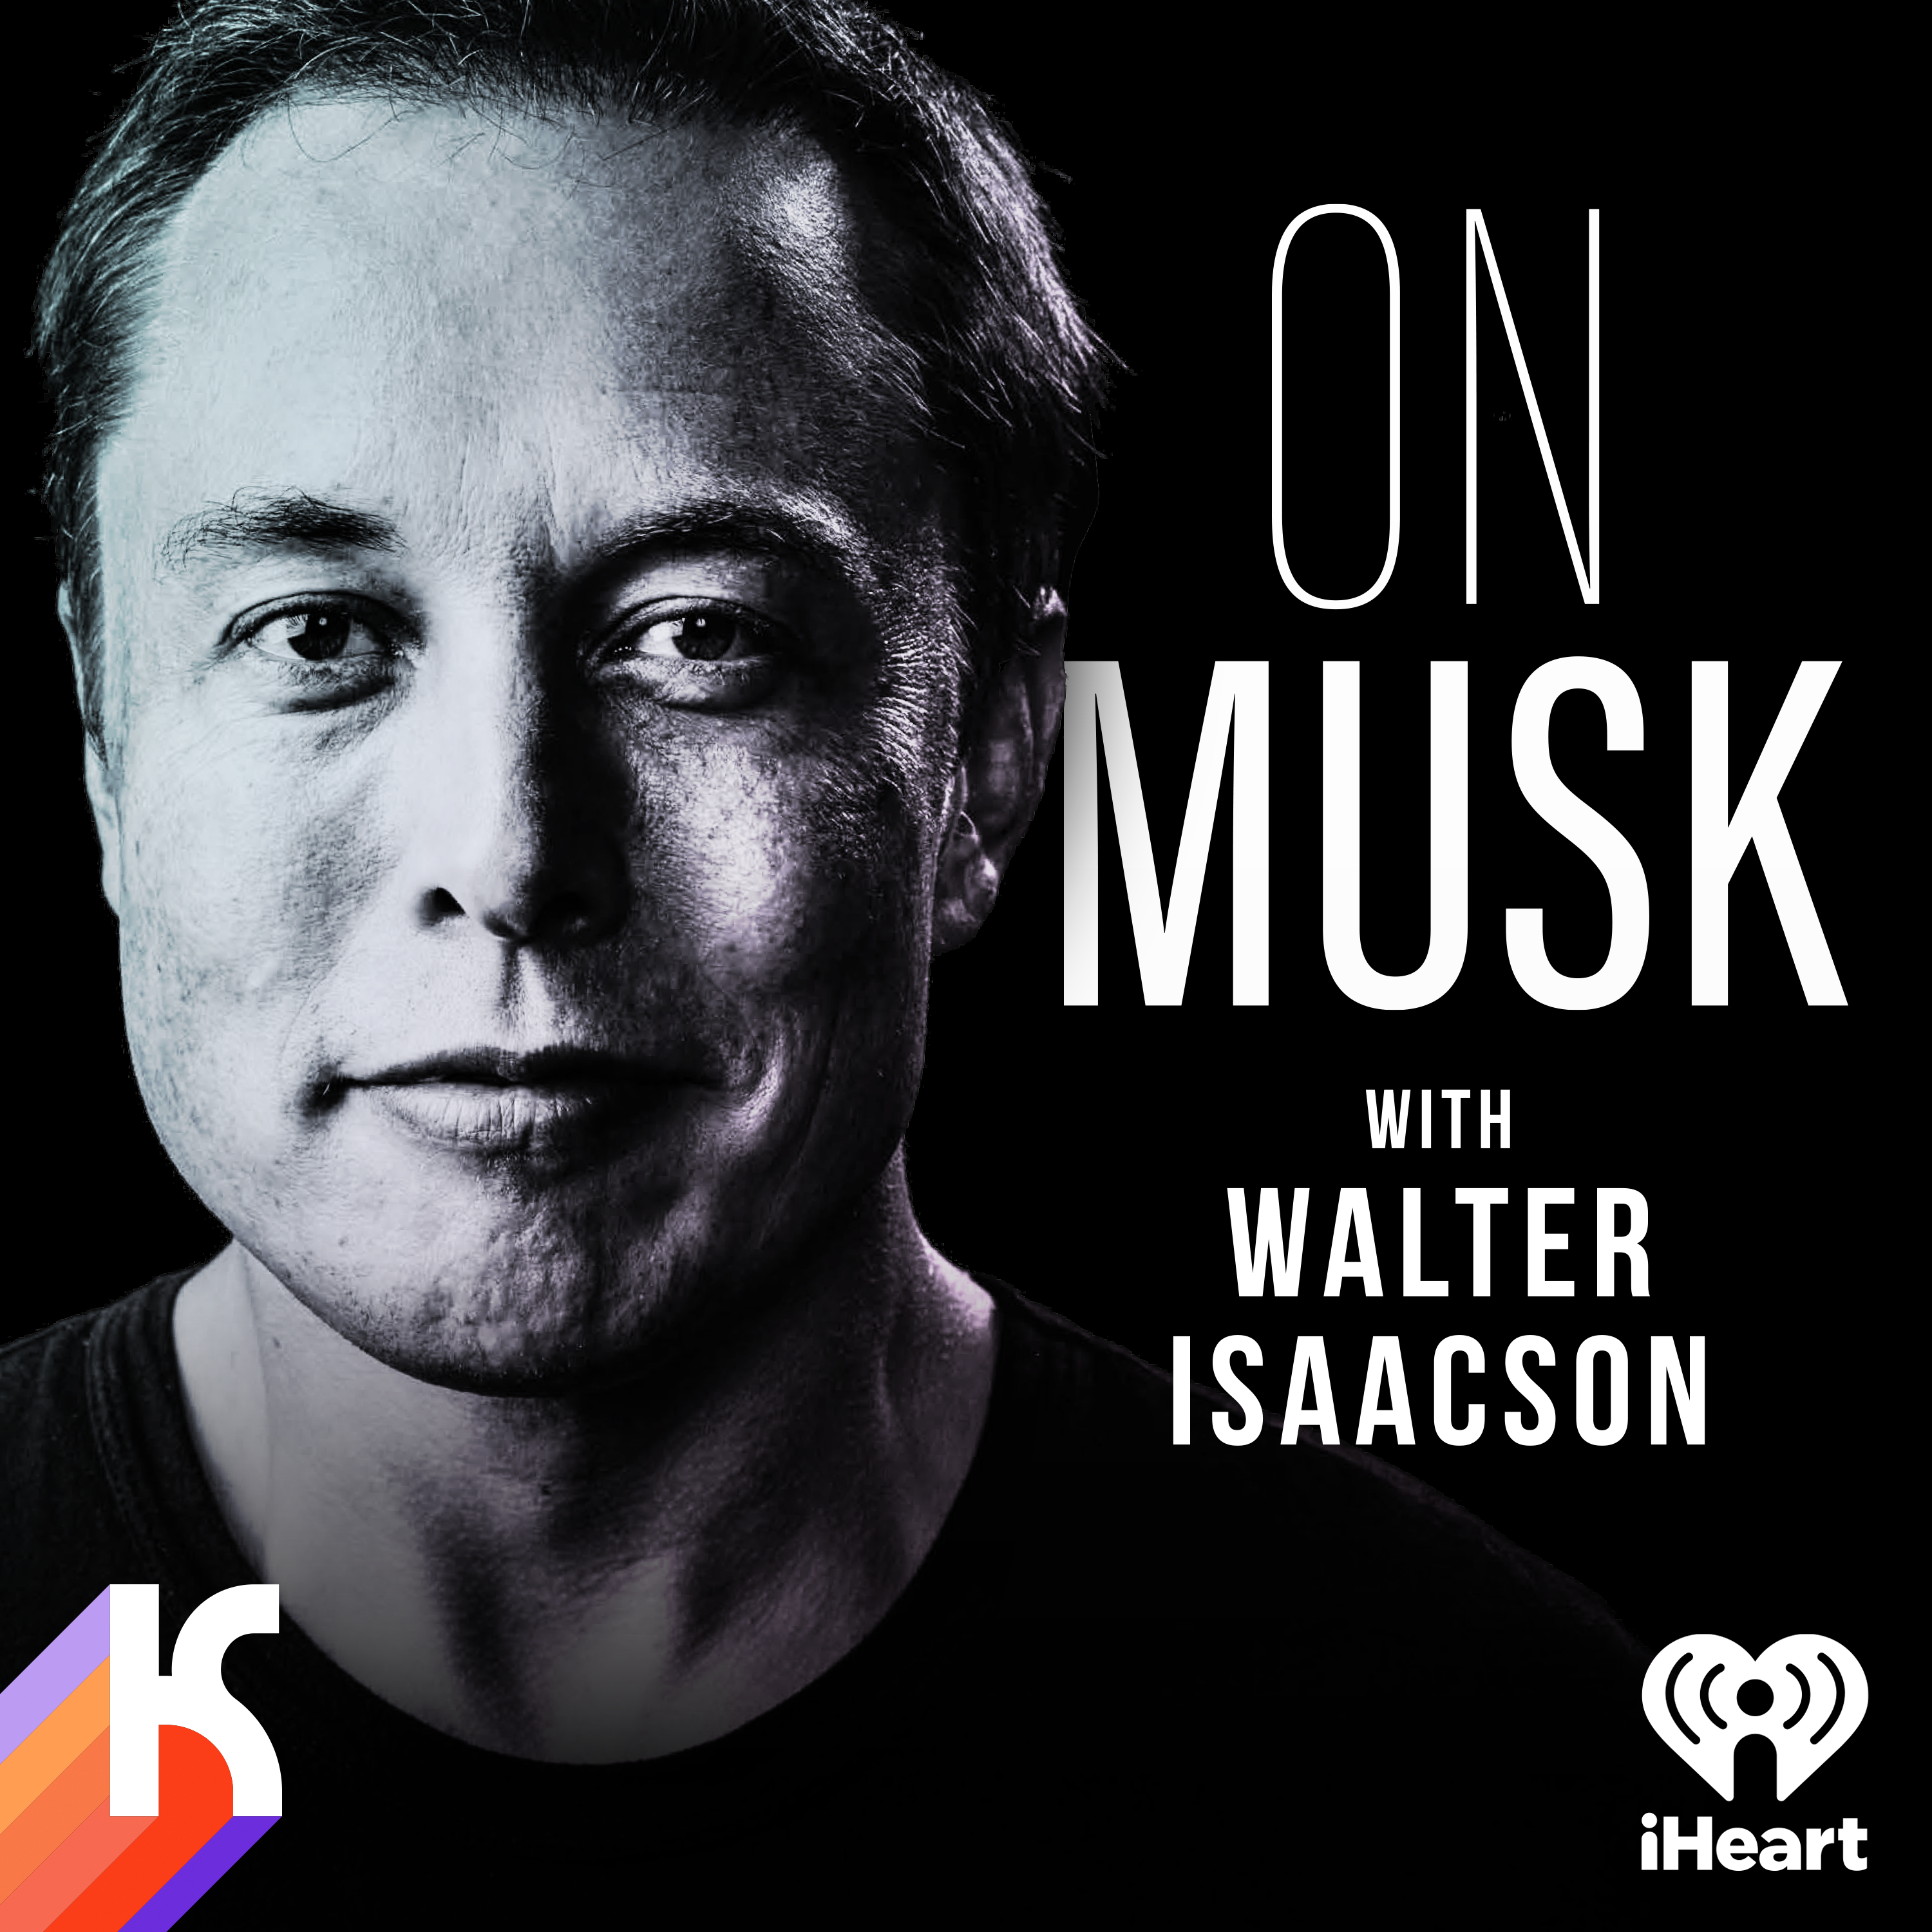 Introducing: On Musk with Walter Isaacson